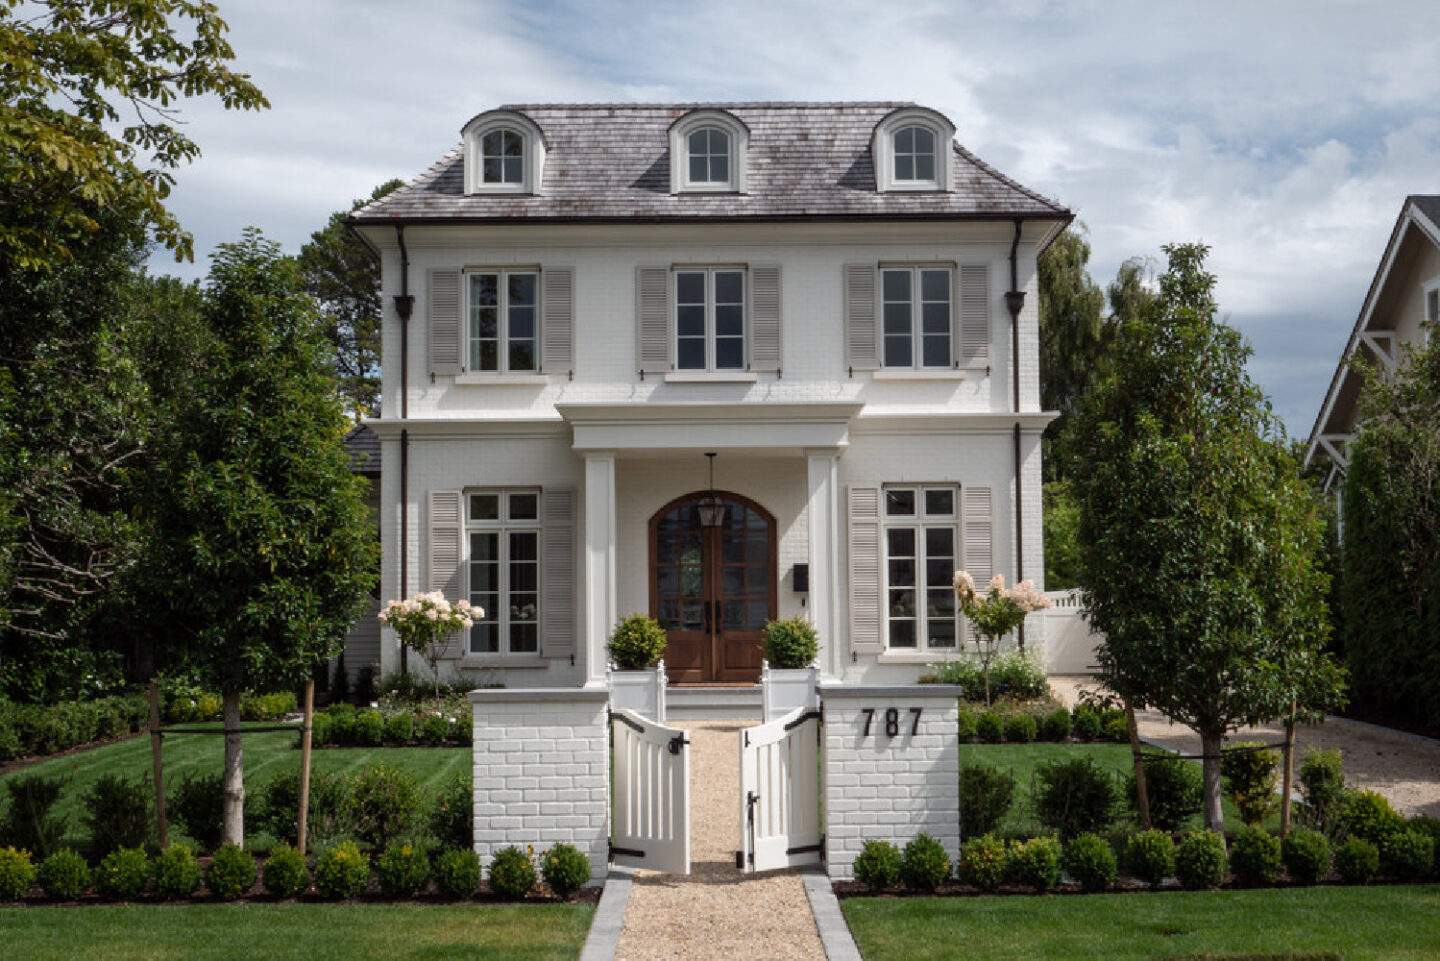 Exterior facade of beautiful French country home with interior design by Jenny Martin Design. #frenchcountryhome #houseexteriors